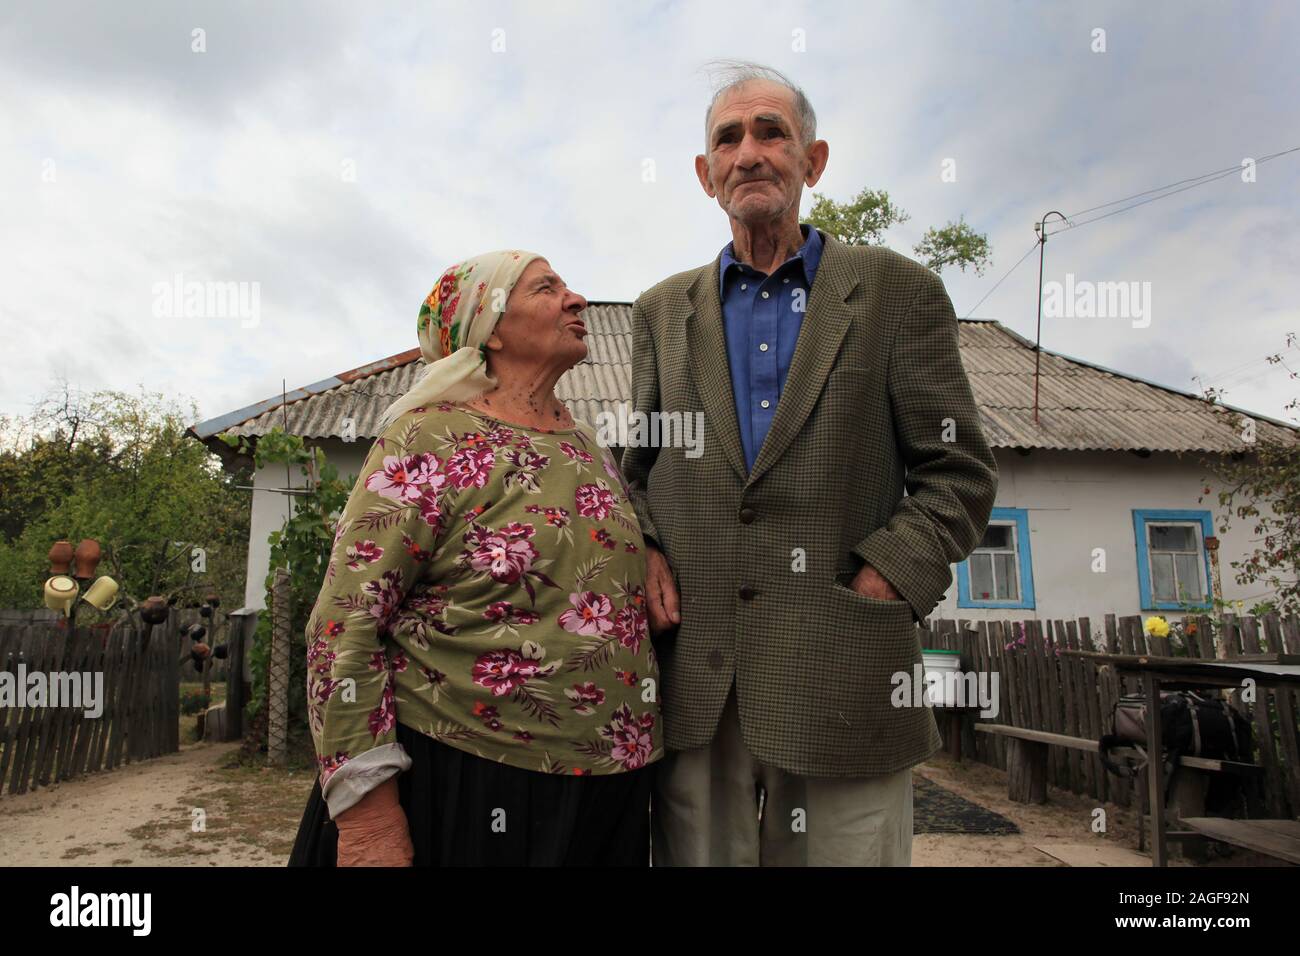 Ivan Ilchenko with his wife Maria in front of their house in the village Kupovate, located in the Chernobyl Exclusion Zone. Both are illegal residents (Samosely), who returned some months after the evacuation of the Chernobyl Exclusion Zone (following the Chernobyl disaster in April 1986) at their farm. Kupovate, Chernobyl Exclusion Zone, Ivankiv Raion, Kiev Oblast, Ukraine, Eastern Europe Stock Photo